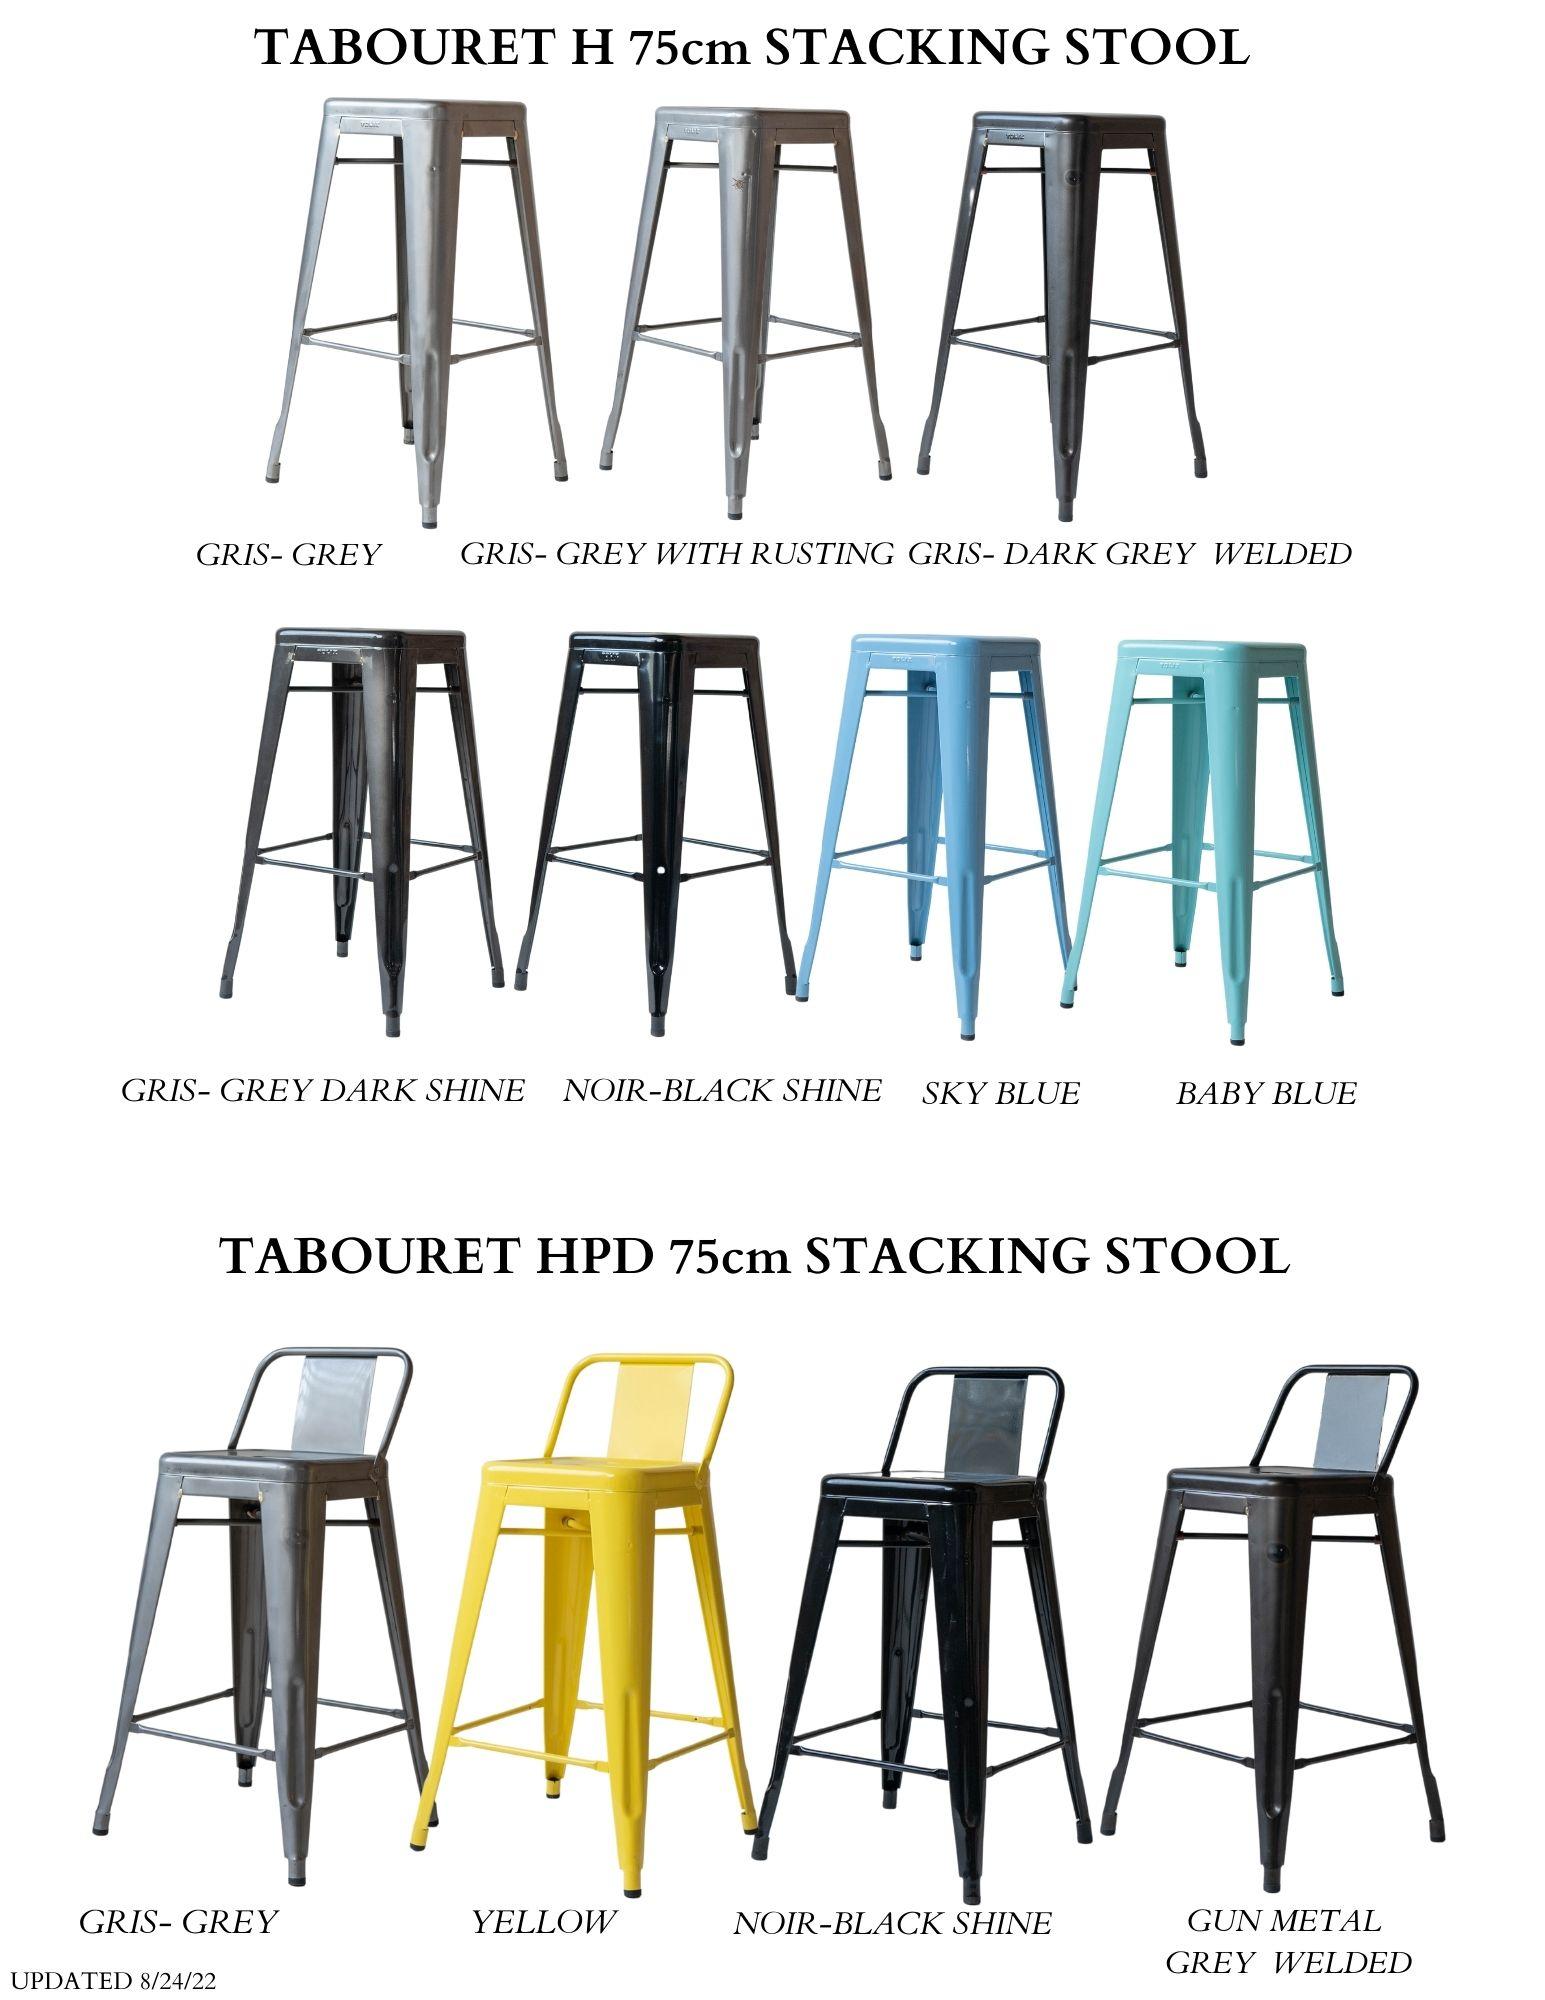 Tolix Made in France Steel Stacking Stools 100's in Stock, Most Colors Available For Sale 1